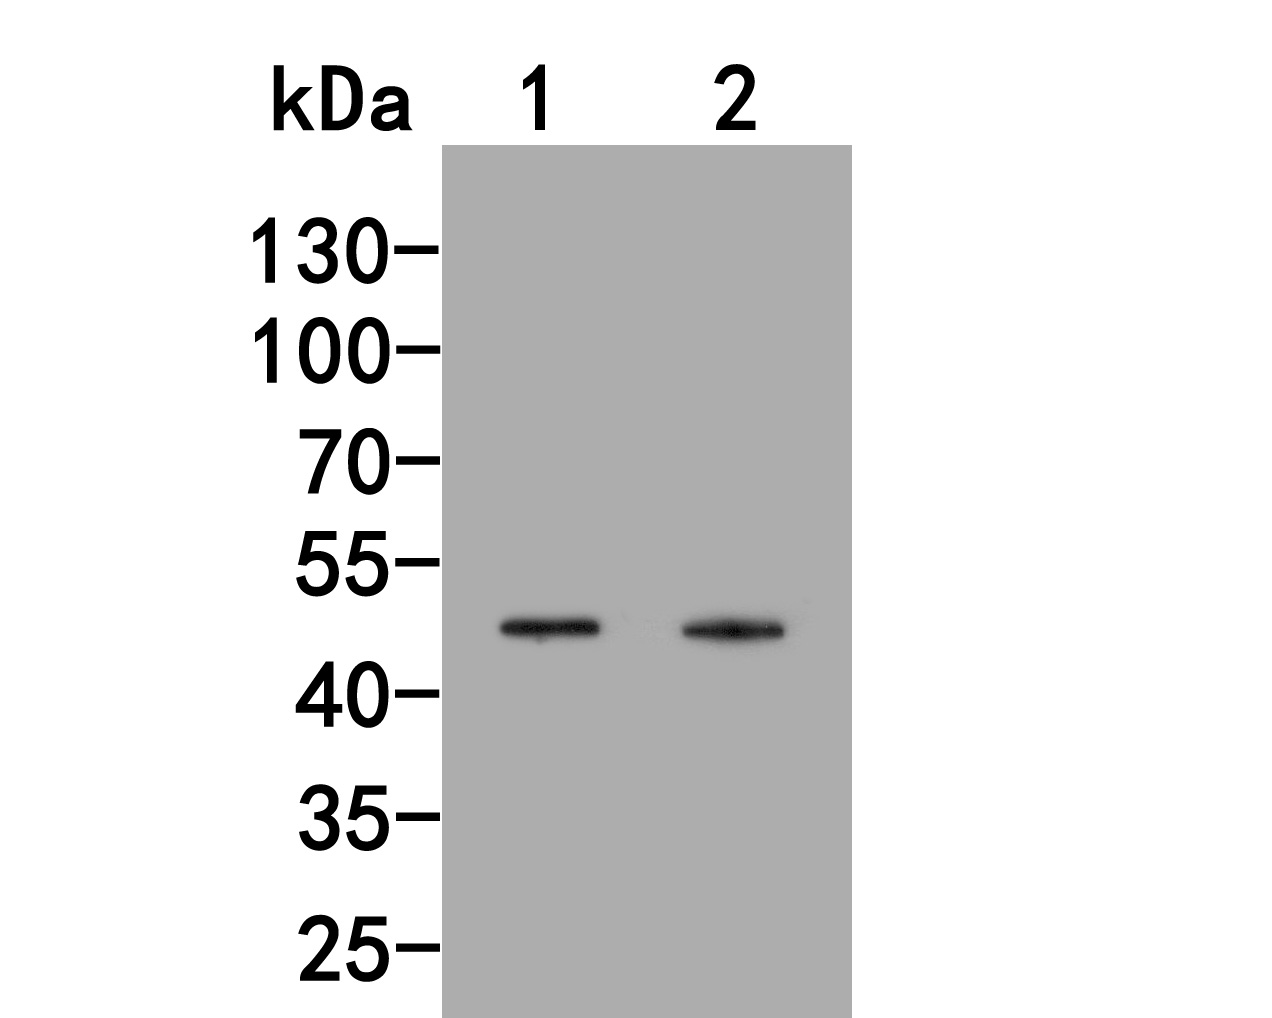 Western blot analysis of Inhibin alpha chain on different lysates. Proteins were transferred to a PVDF membrane and blocked with 5% NFDM/TBST for 1 hour at room temperature. The primary antibody (HA500272, 1/1,000) was used in 5% NFDM/TBST at room temperature for 2 hours. Goat Anti-Rabbit IgG - HRP Secondary Antibody (HA1001) at 1:200,000 dilution was used for 1 hour at room temperature.<br />
Positive control: <br />
Lane 1: K562 cell lysate<br />
Lane 2: Hela cell lysate